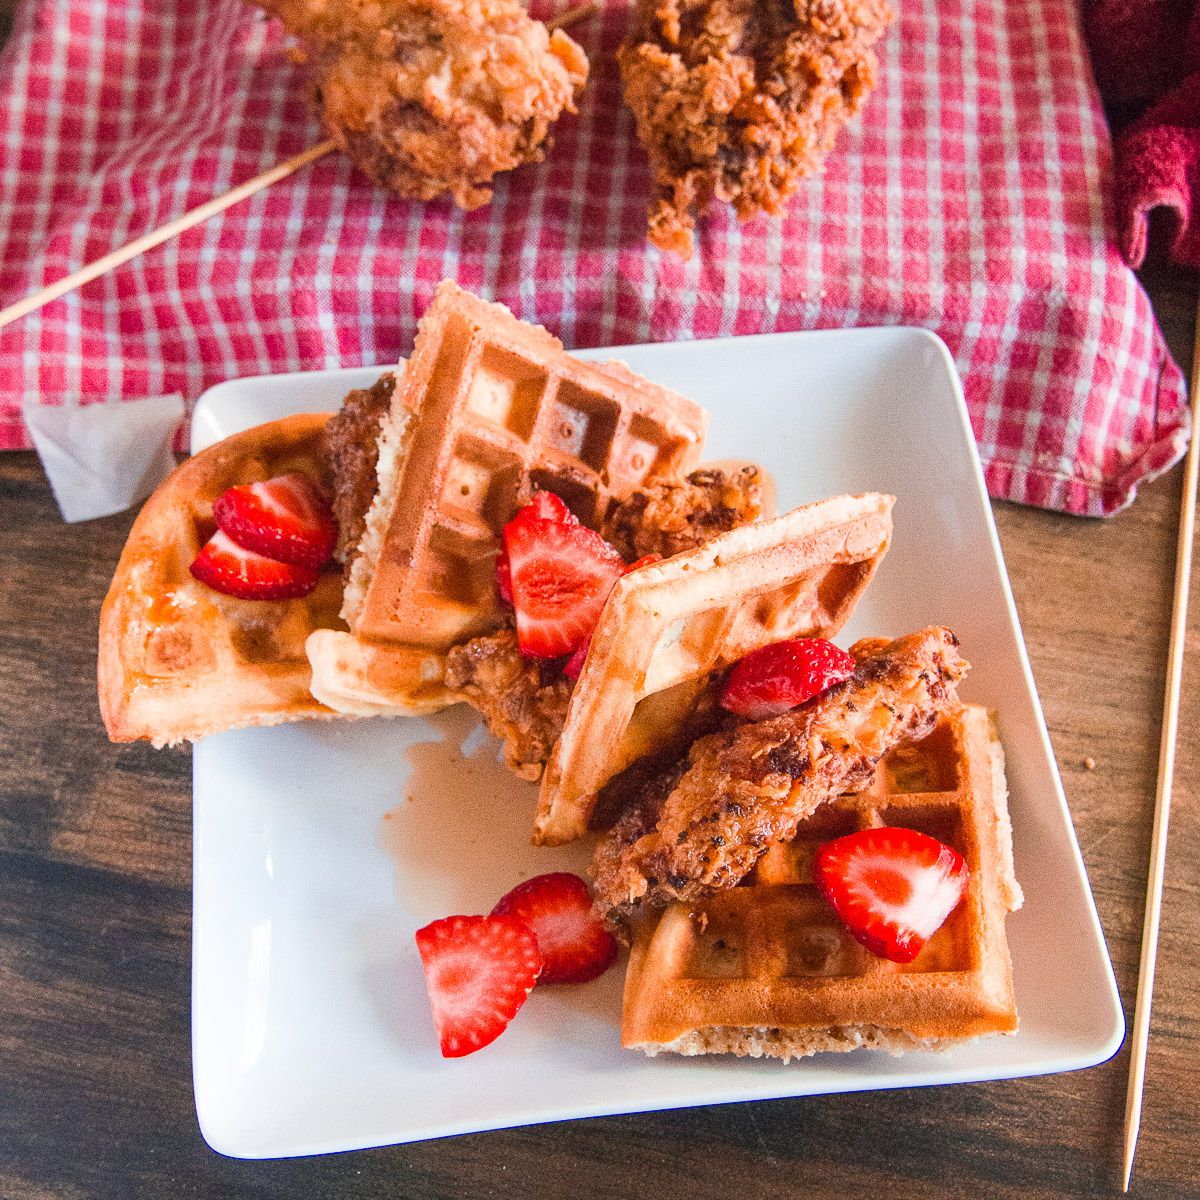 Skillet Fried Chicken and Waffles